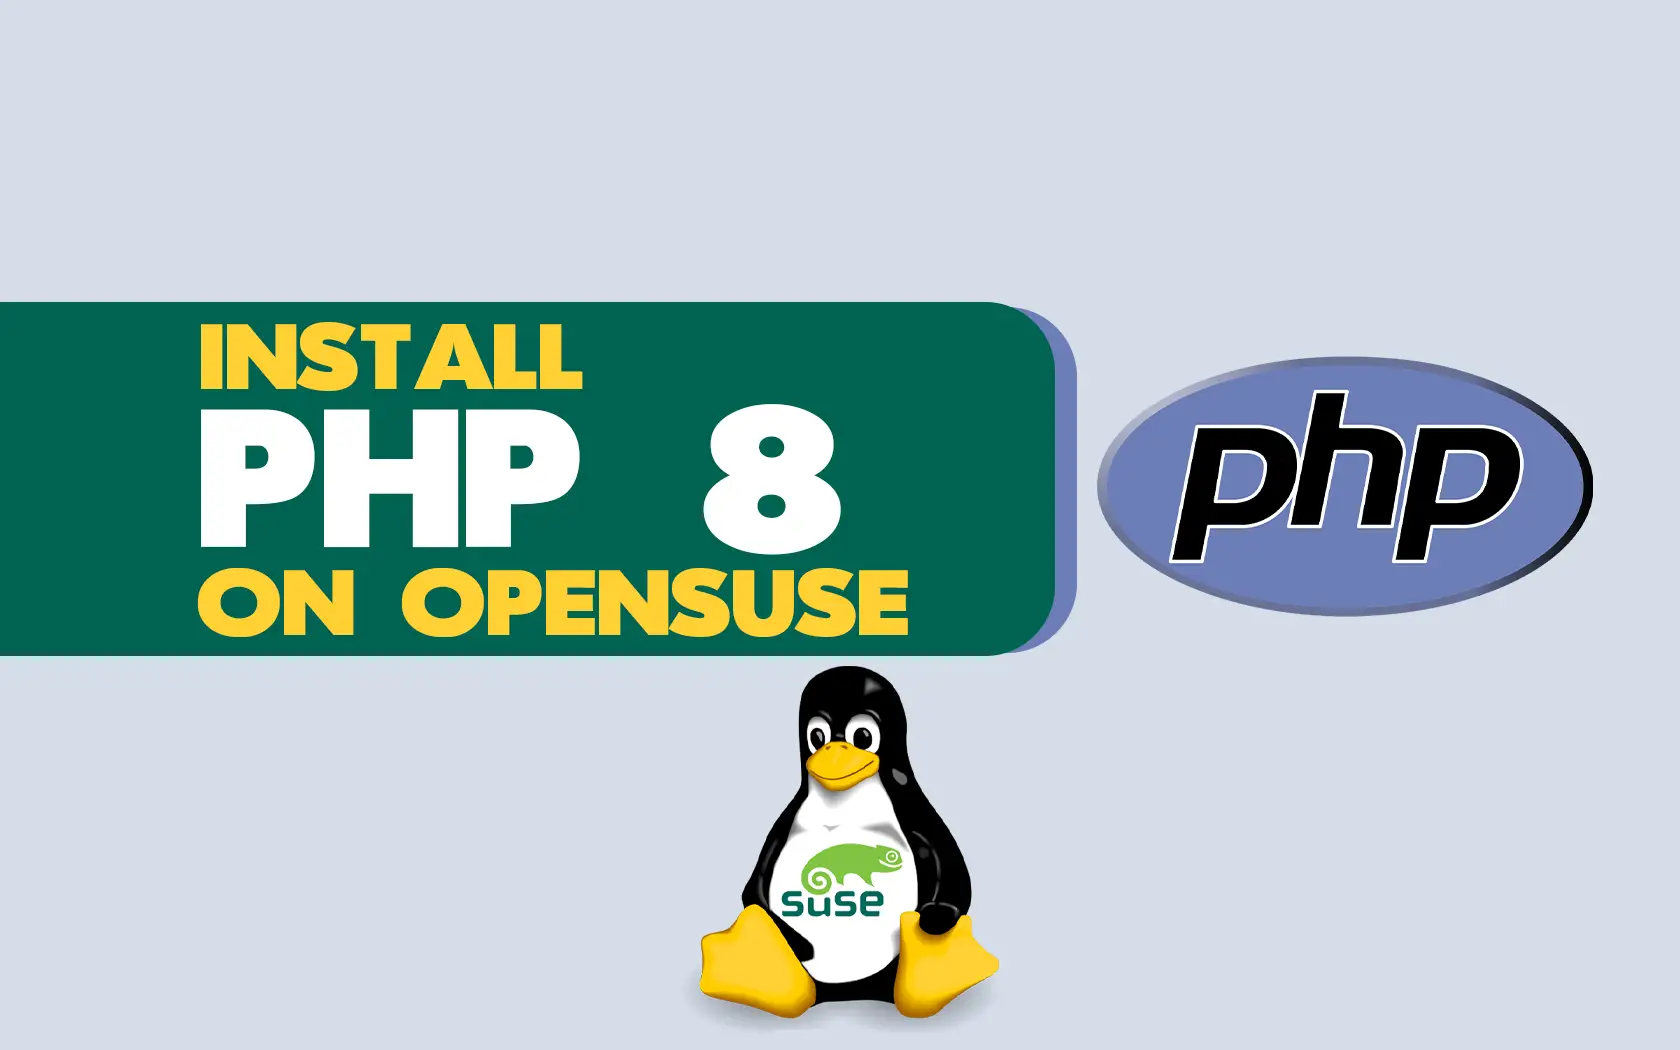 Install PHP 8 on OpenSUSE